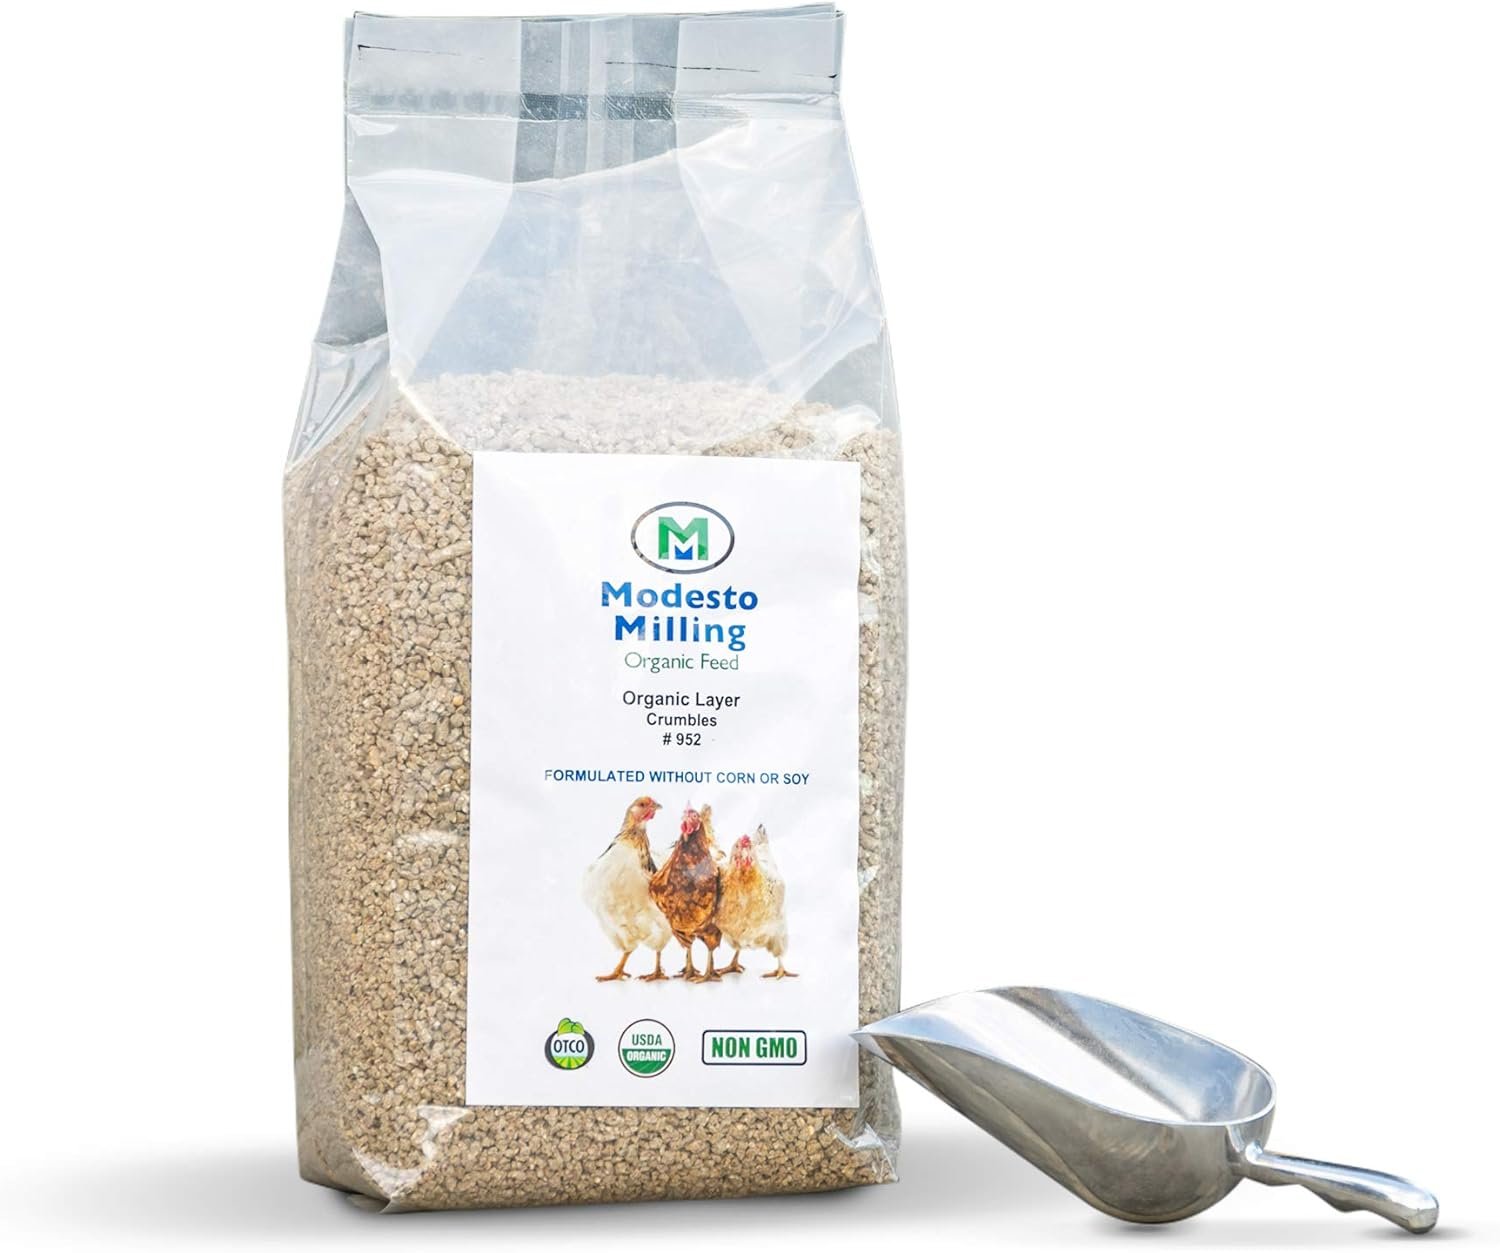 Modesto Milling Organic, Non-GMO Layer Crumbles for Chickens, Formulated Without Corn or Soy, 10lbs; Item# 952